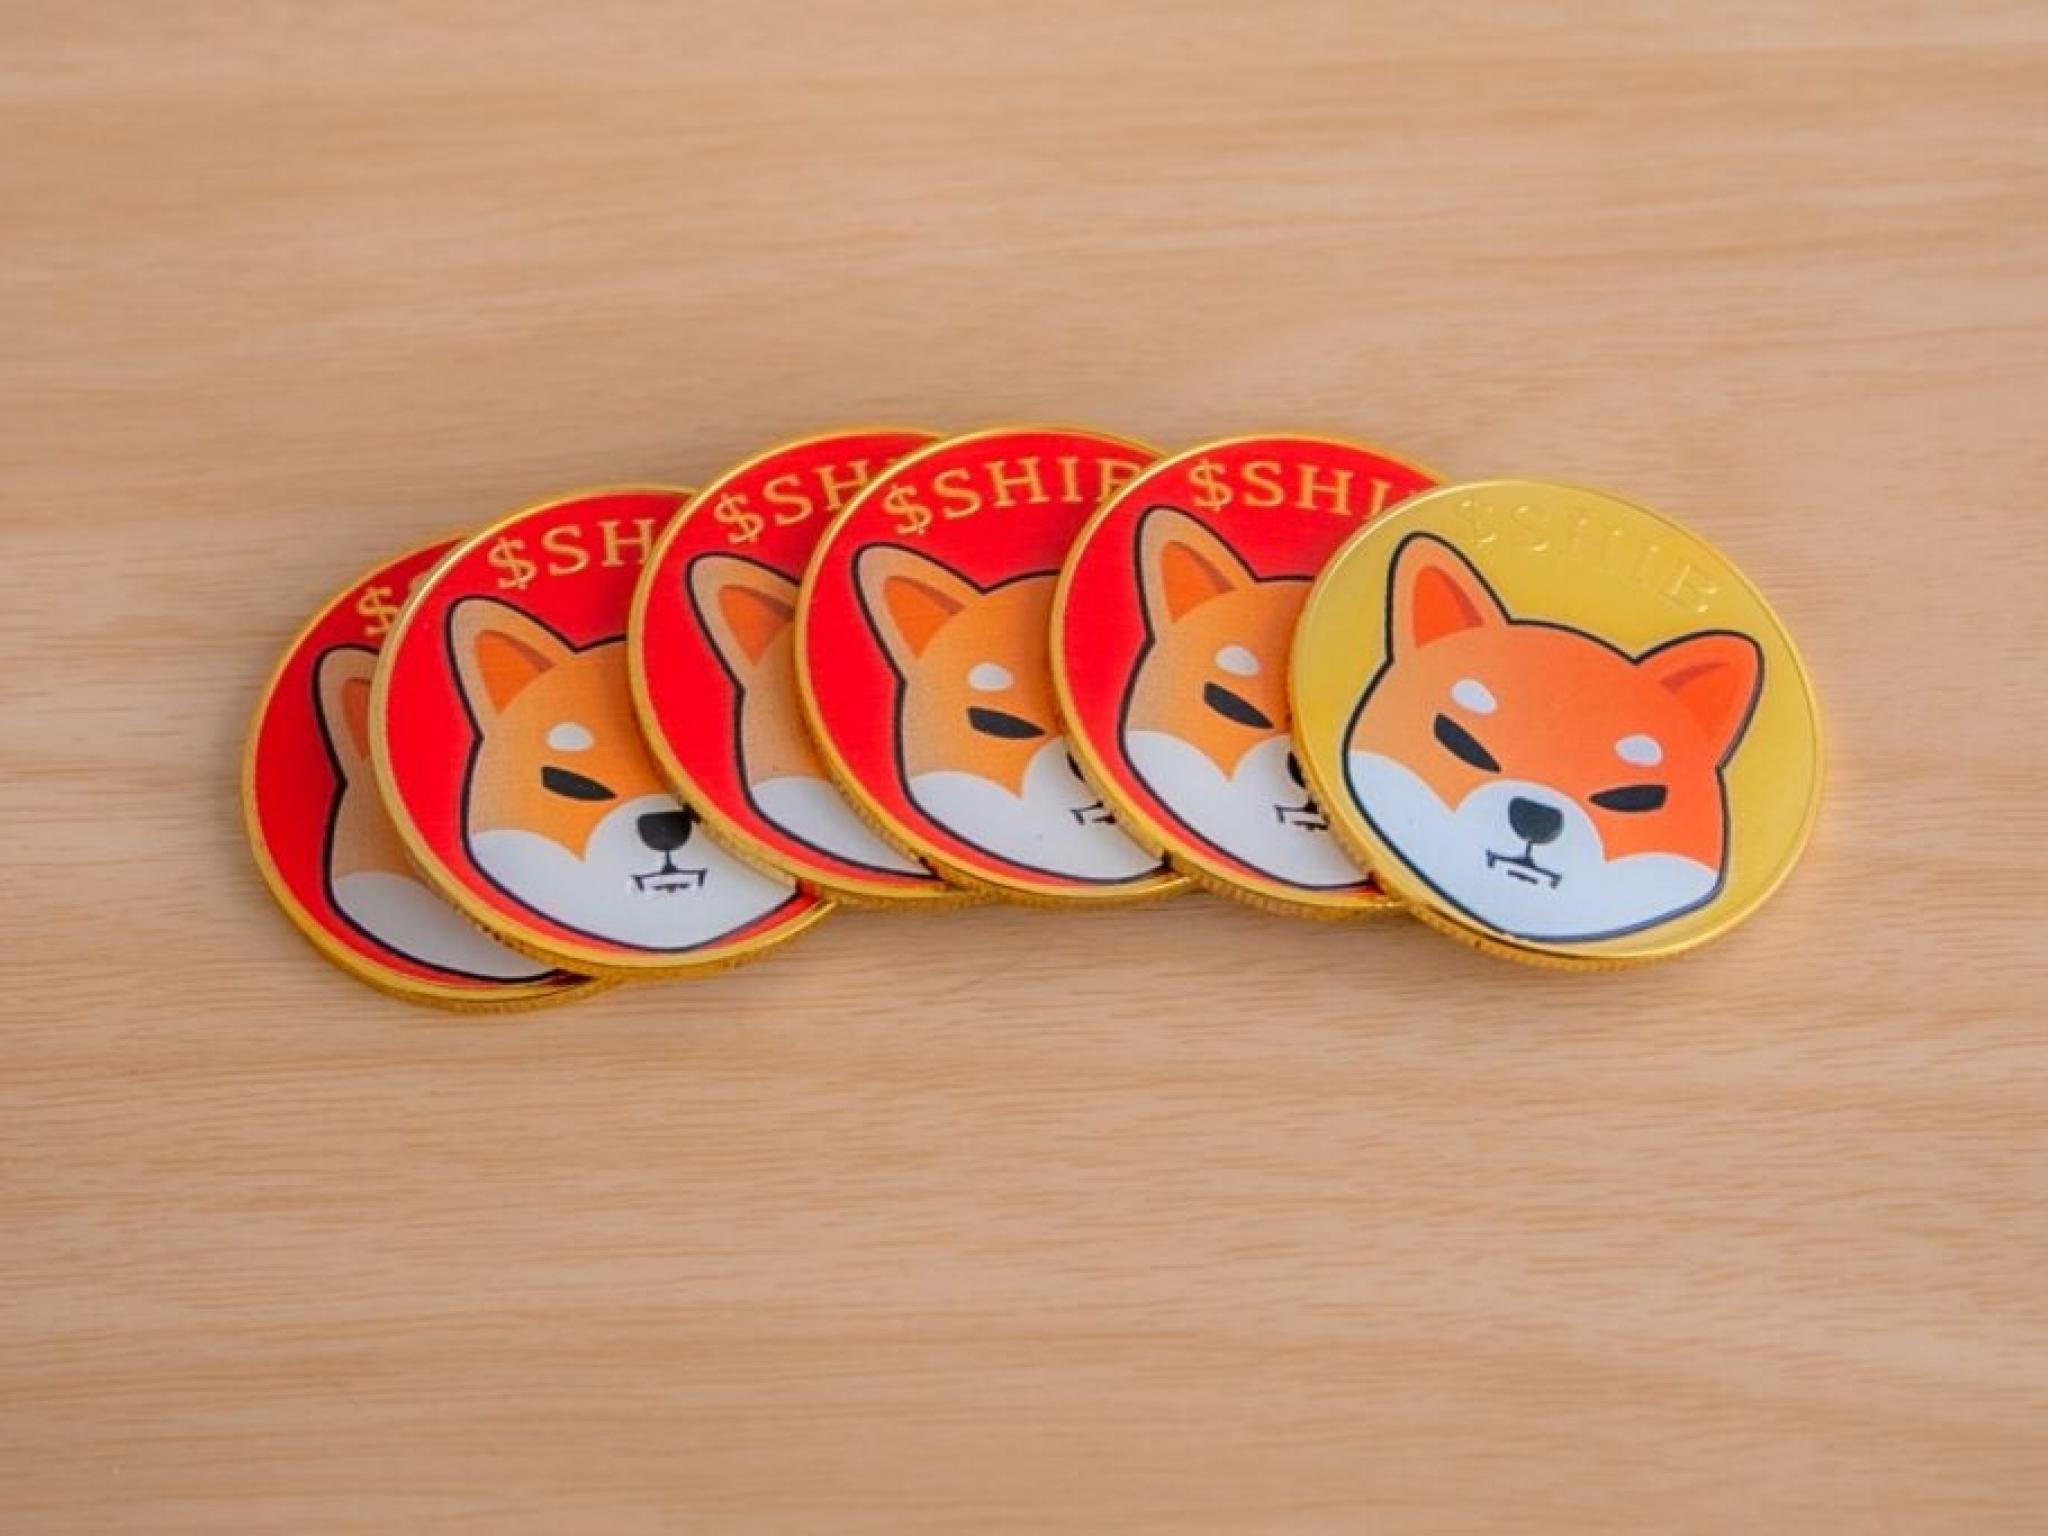  dogecoin-killer-shiba-inu-burn-rate-increases-burn-rate-for-3-straight-days-what-is-going-on 